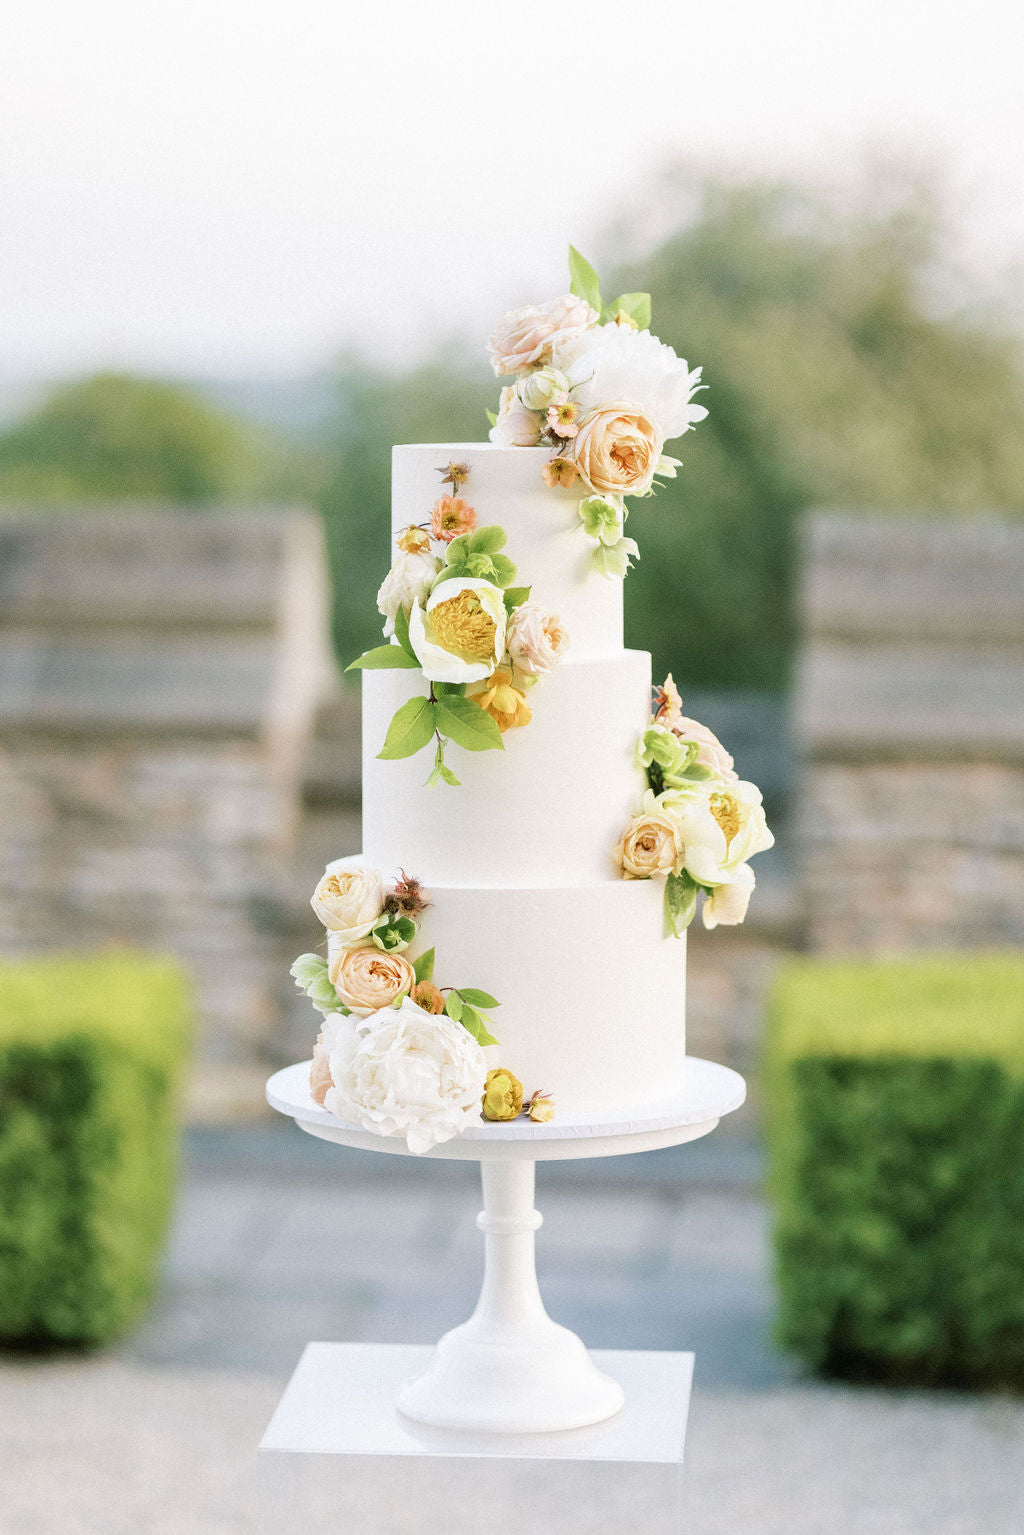 Three tiered white buttercream wedding cake by the Vanilla Pod Bakery at Euridge Manor - Image by Camilla Arnold Photography